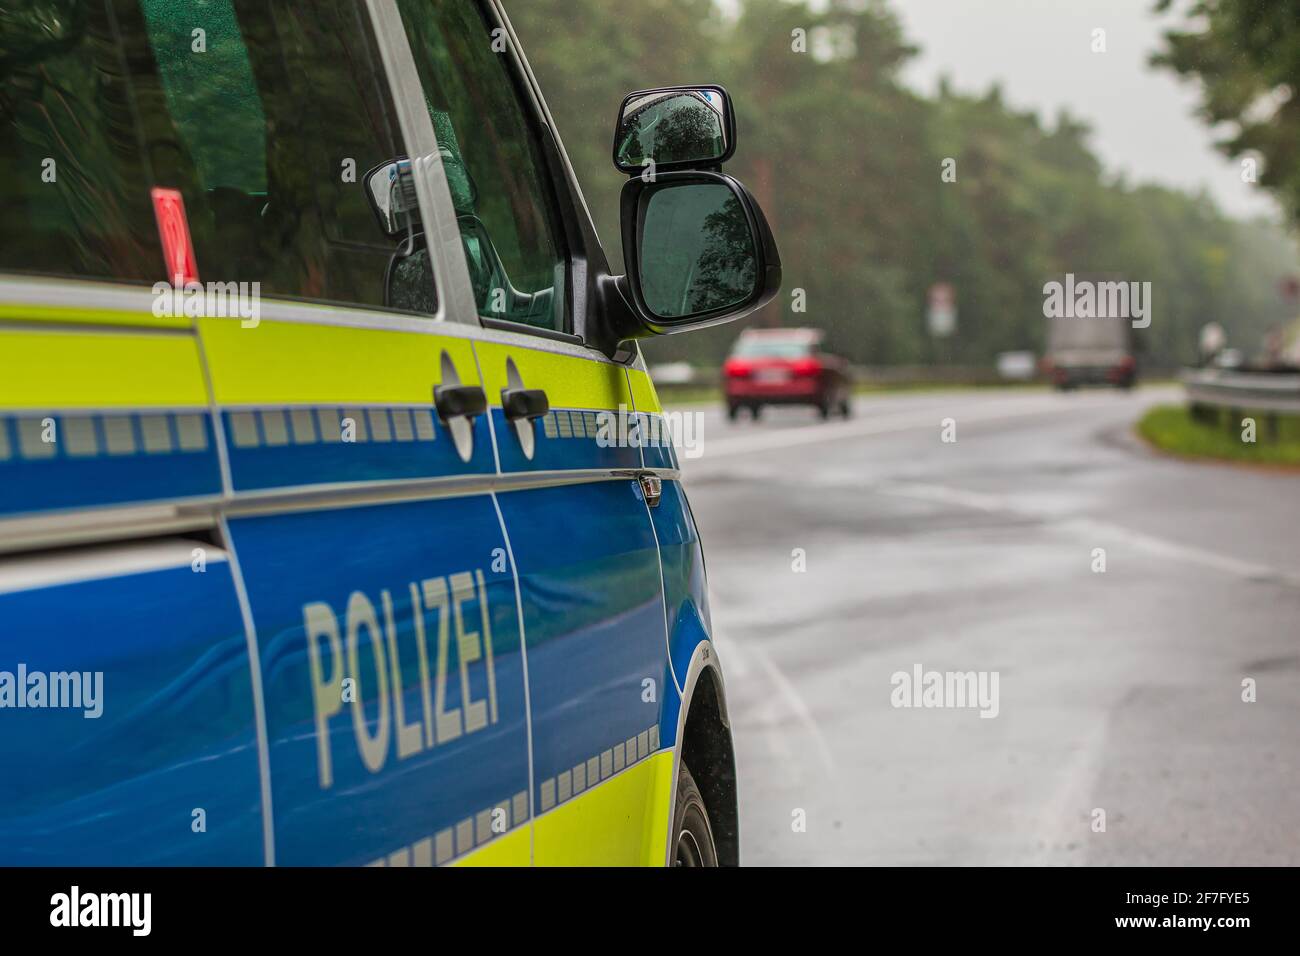 Police car from the side. Passenger's side with police writing on the body. Highway in the background. Mirror window body from the passenger side with Stock Photo